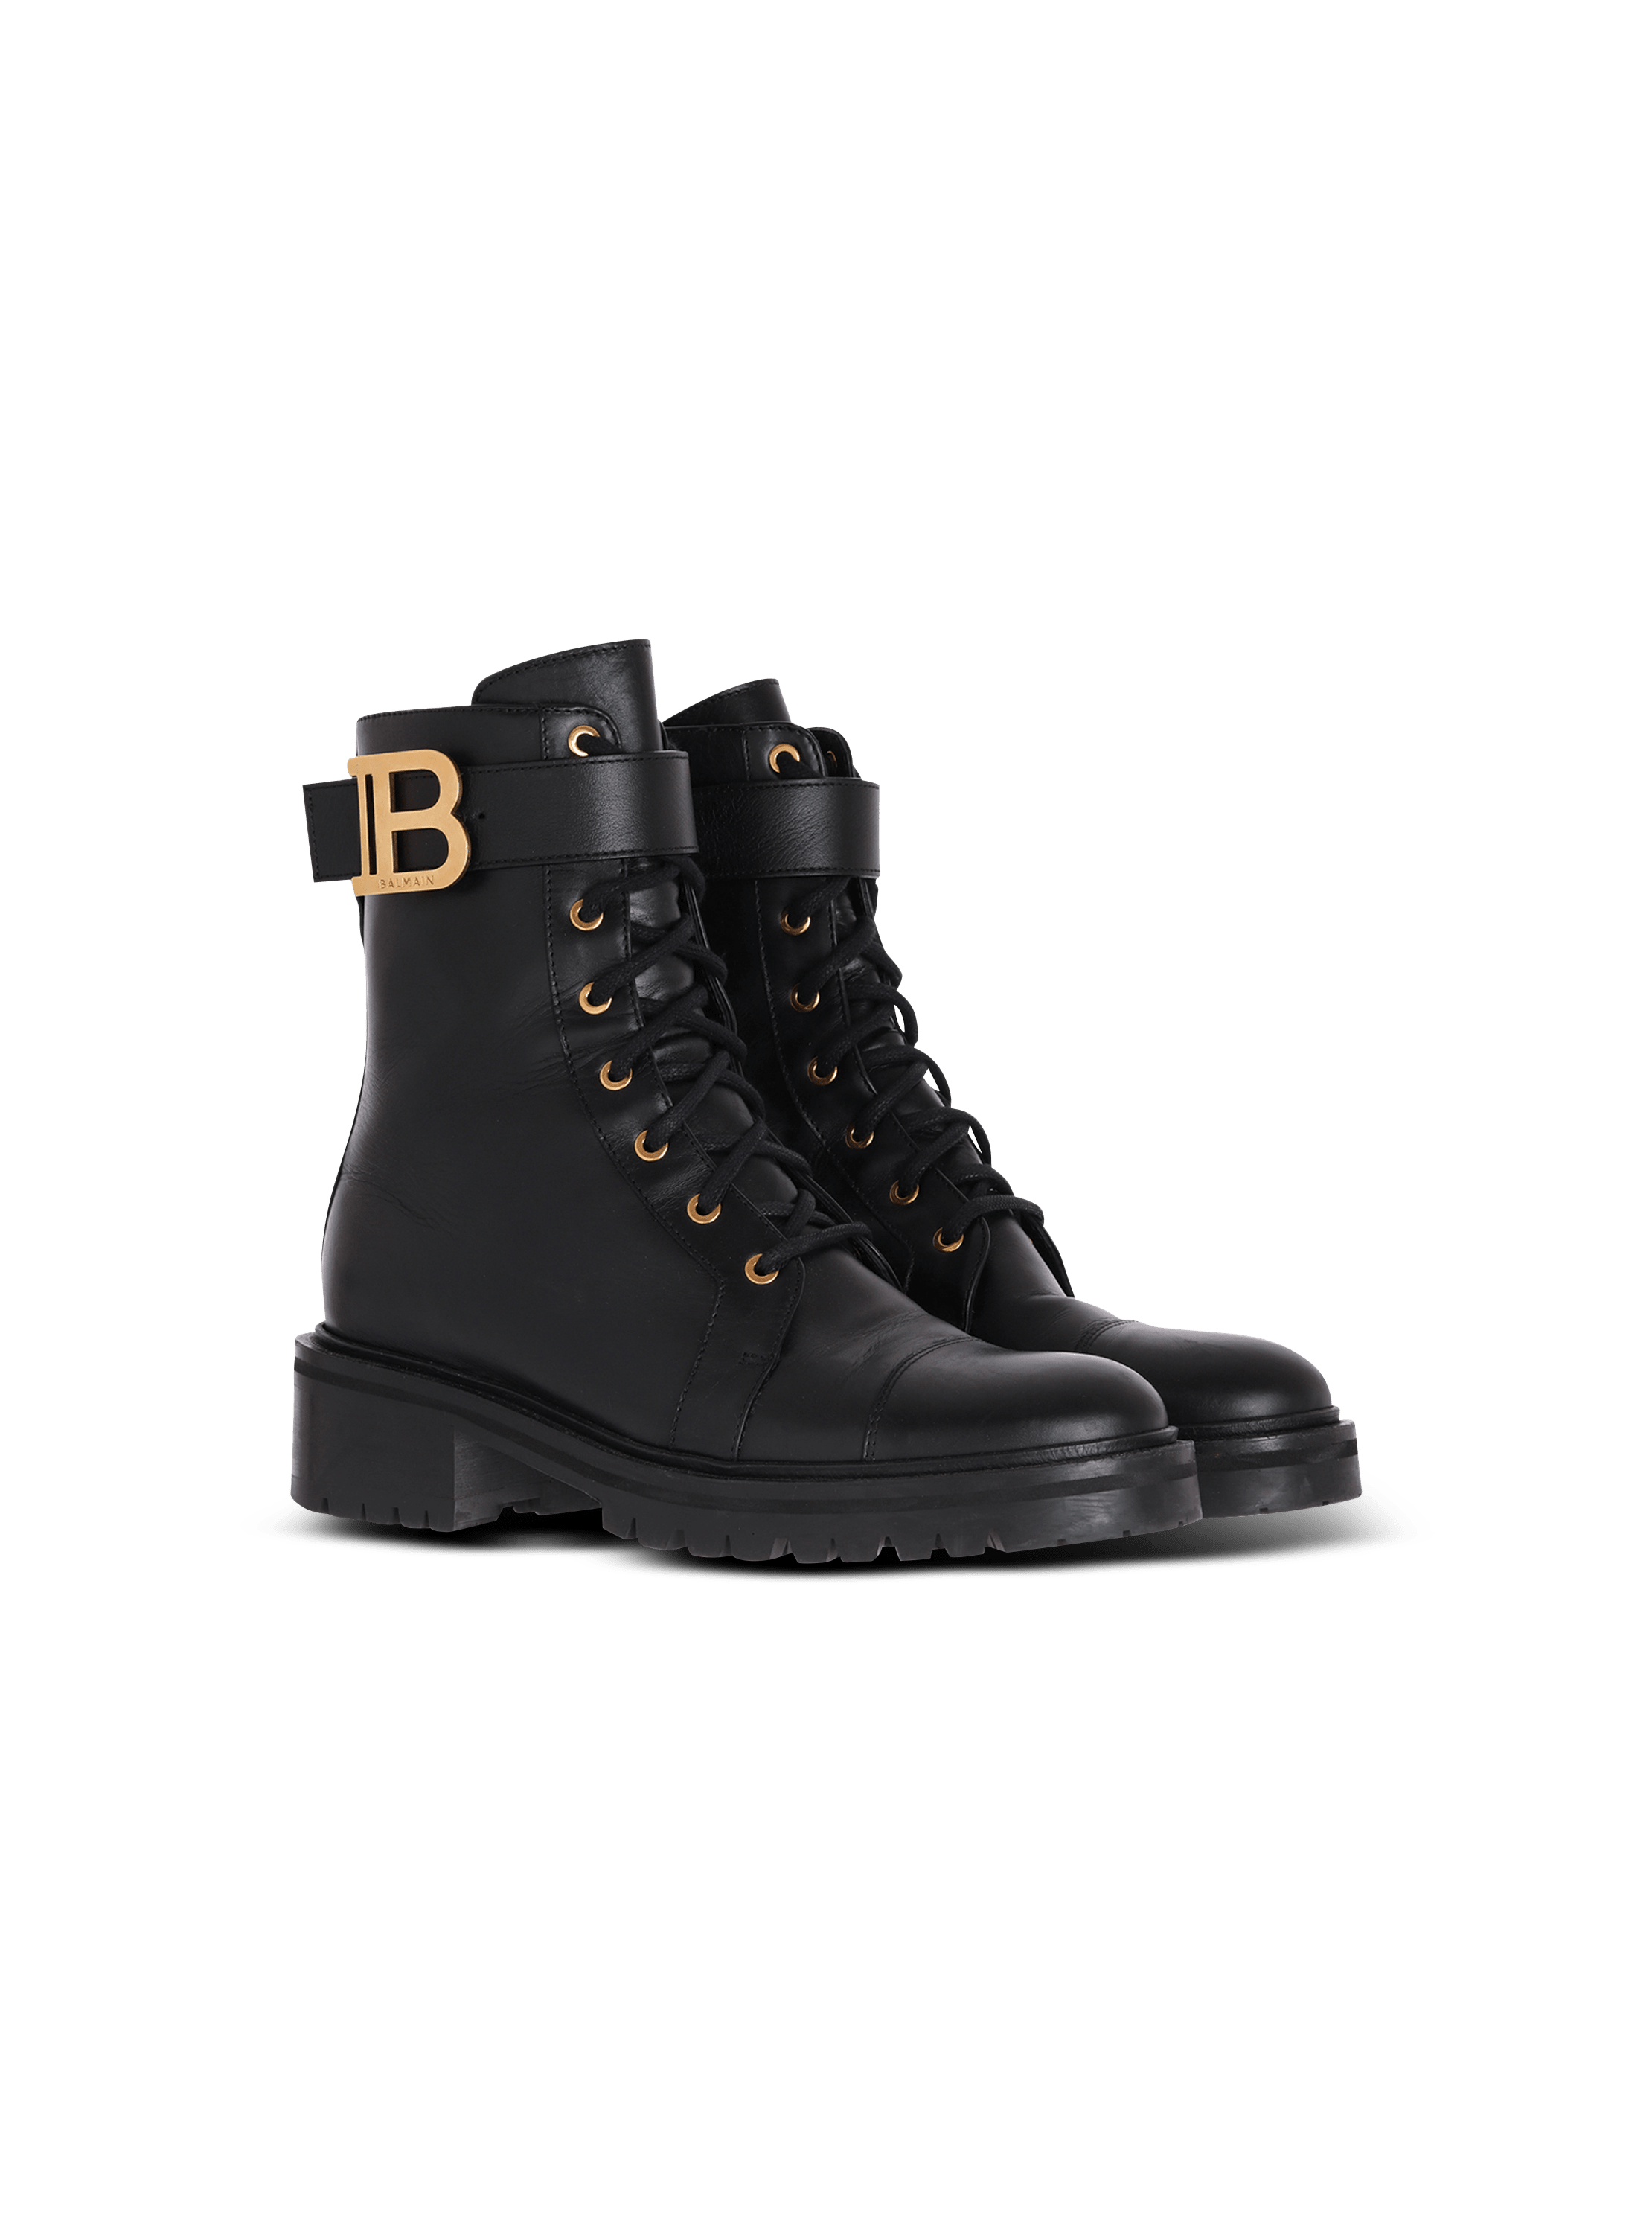 Perfecting Urban Style with Balmain Ranger Leather Ankle Boots